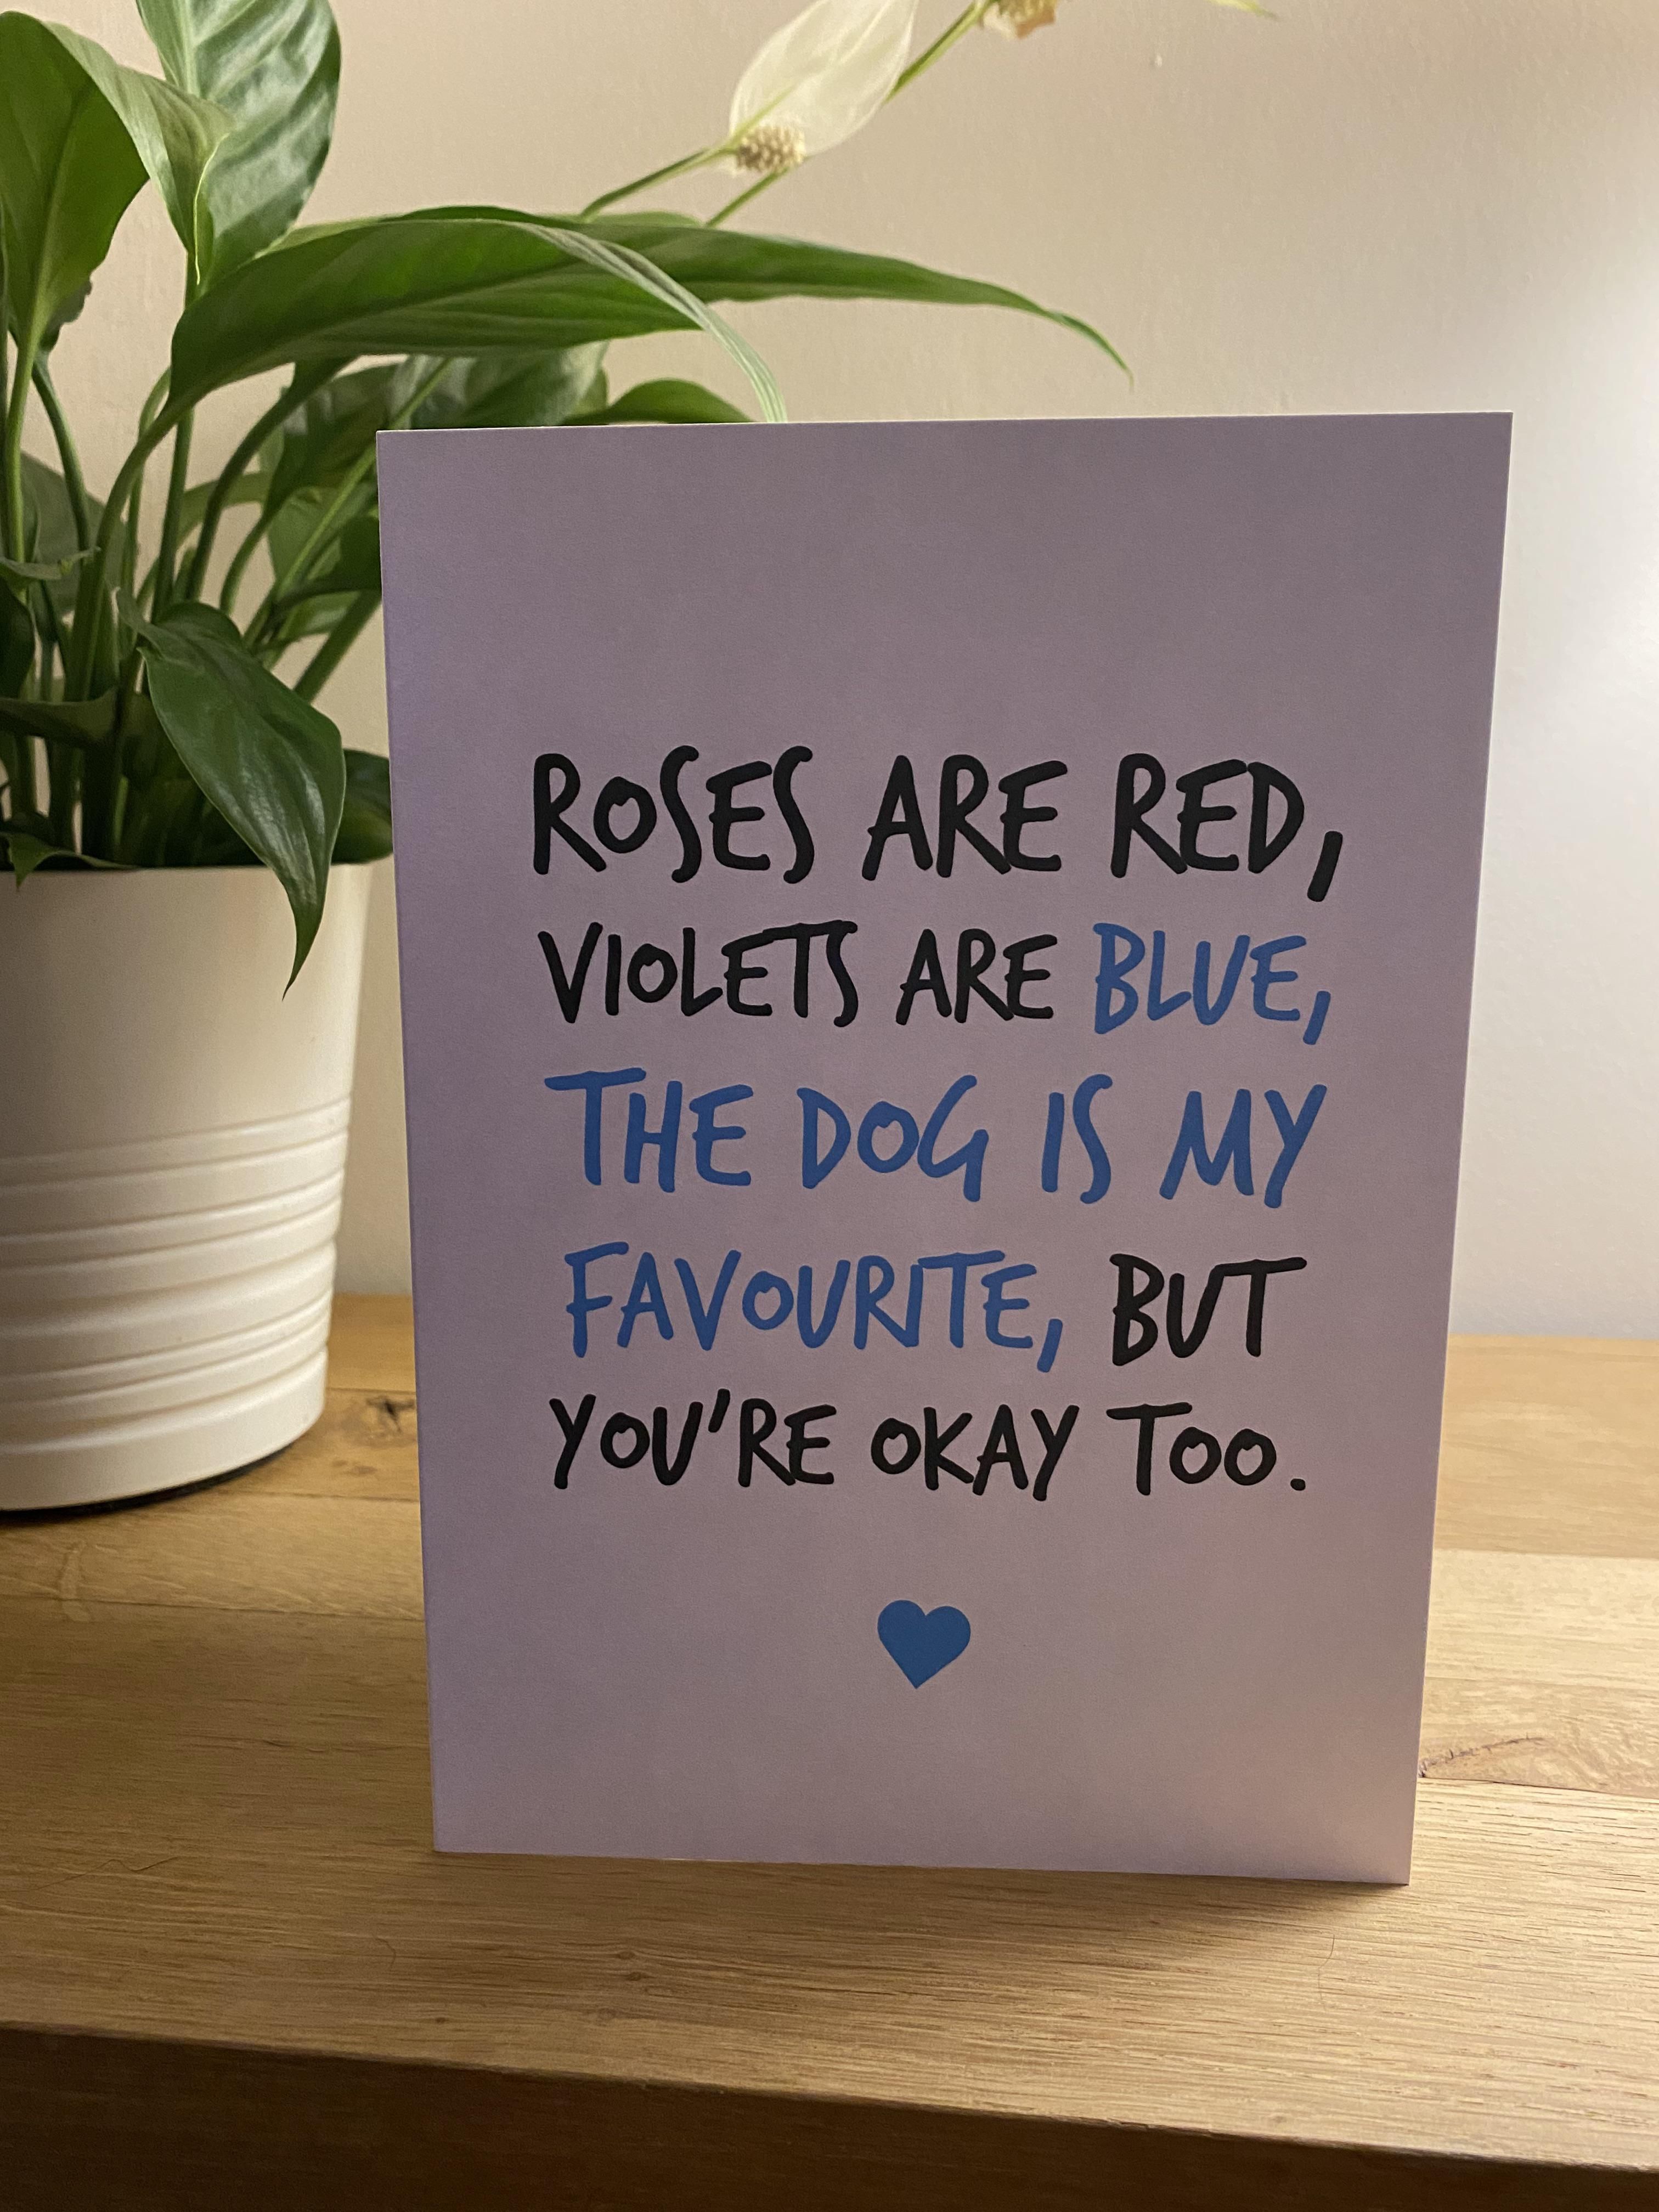 This year’s anniversary card from me to my partner